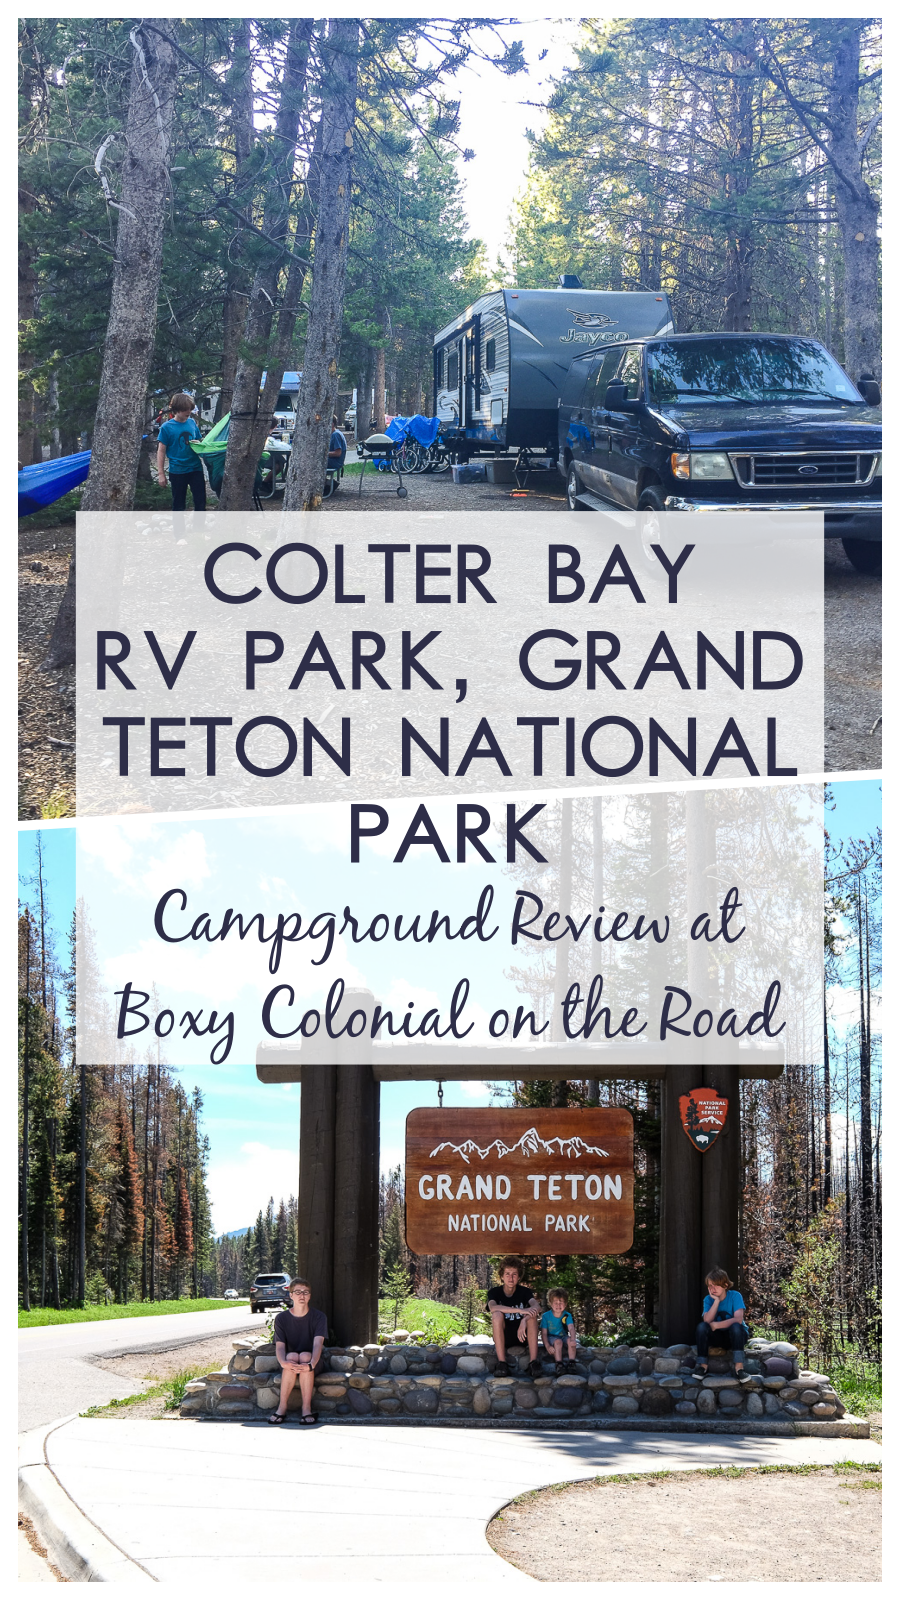 Colter Bay RV Park Campground Review, Grand Teton National Park #nps #campground #rving